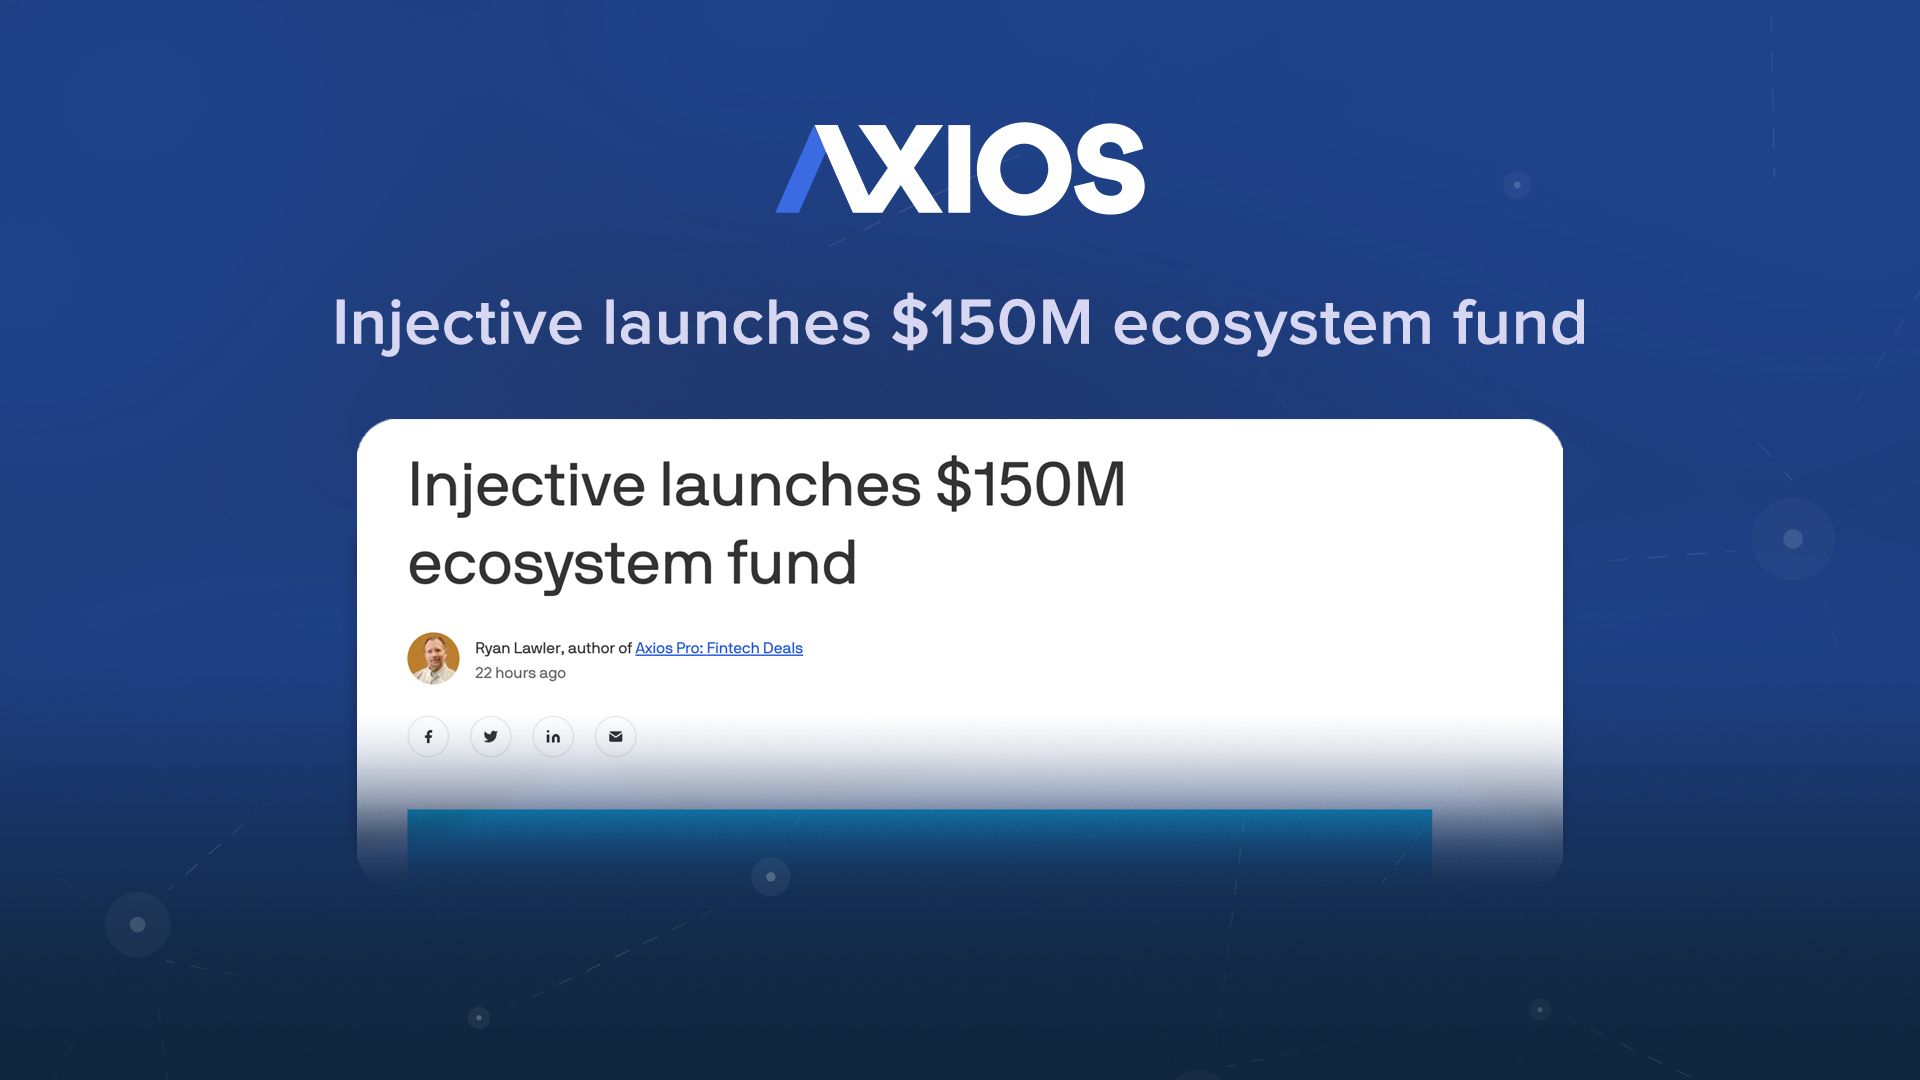 (Axios) Injective launches $150M ecosystem fund